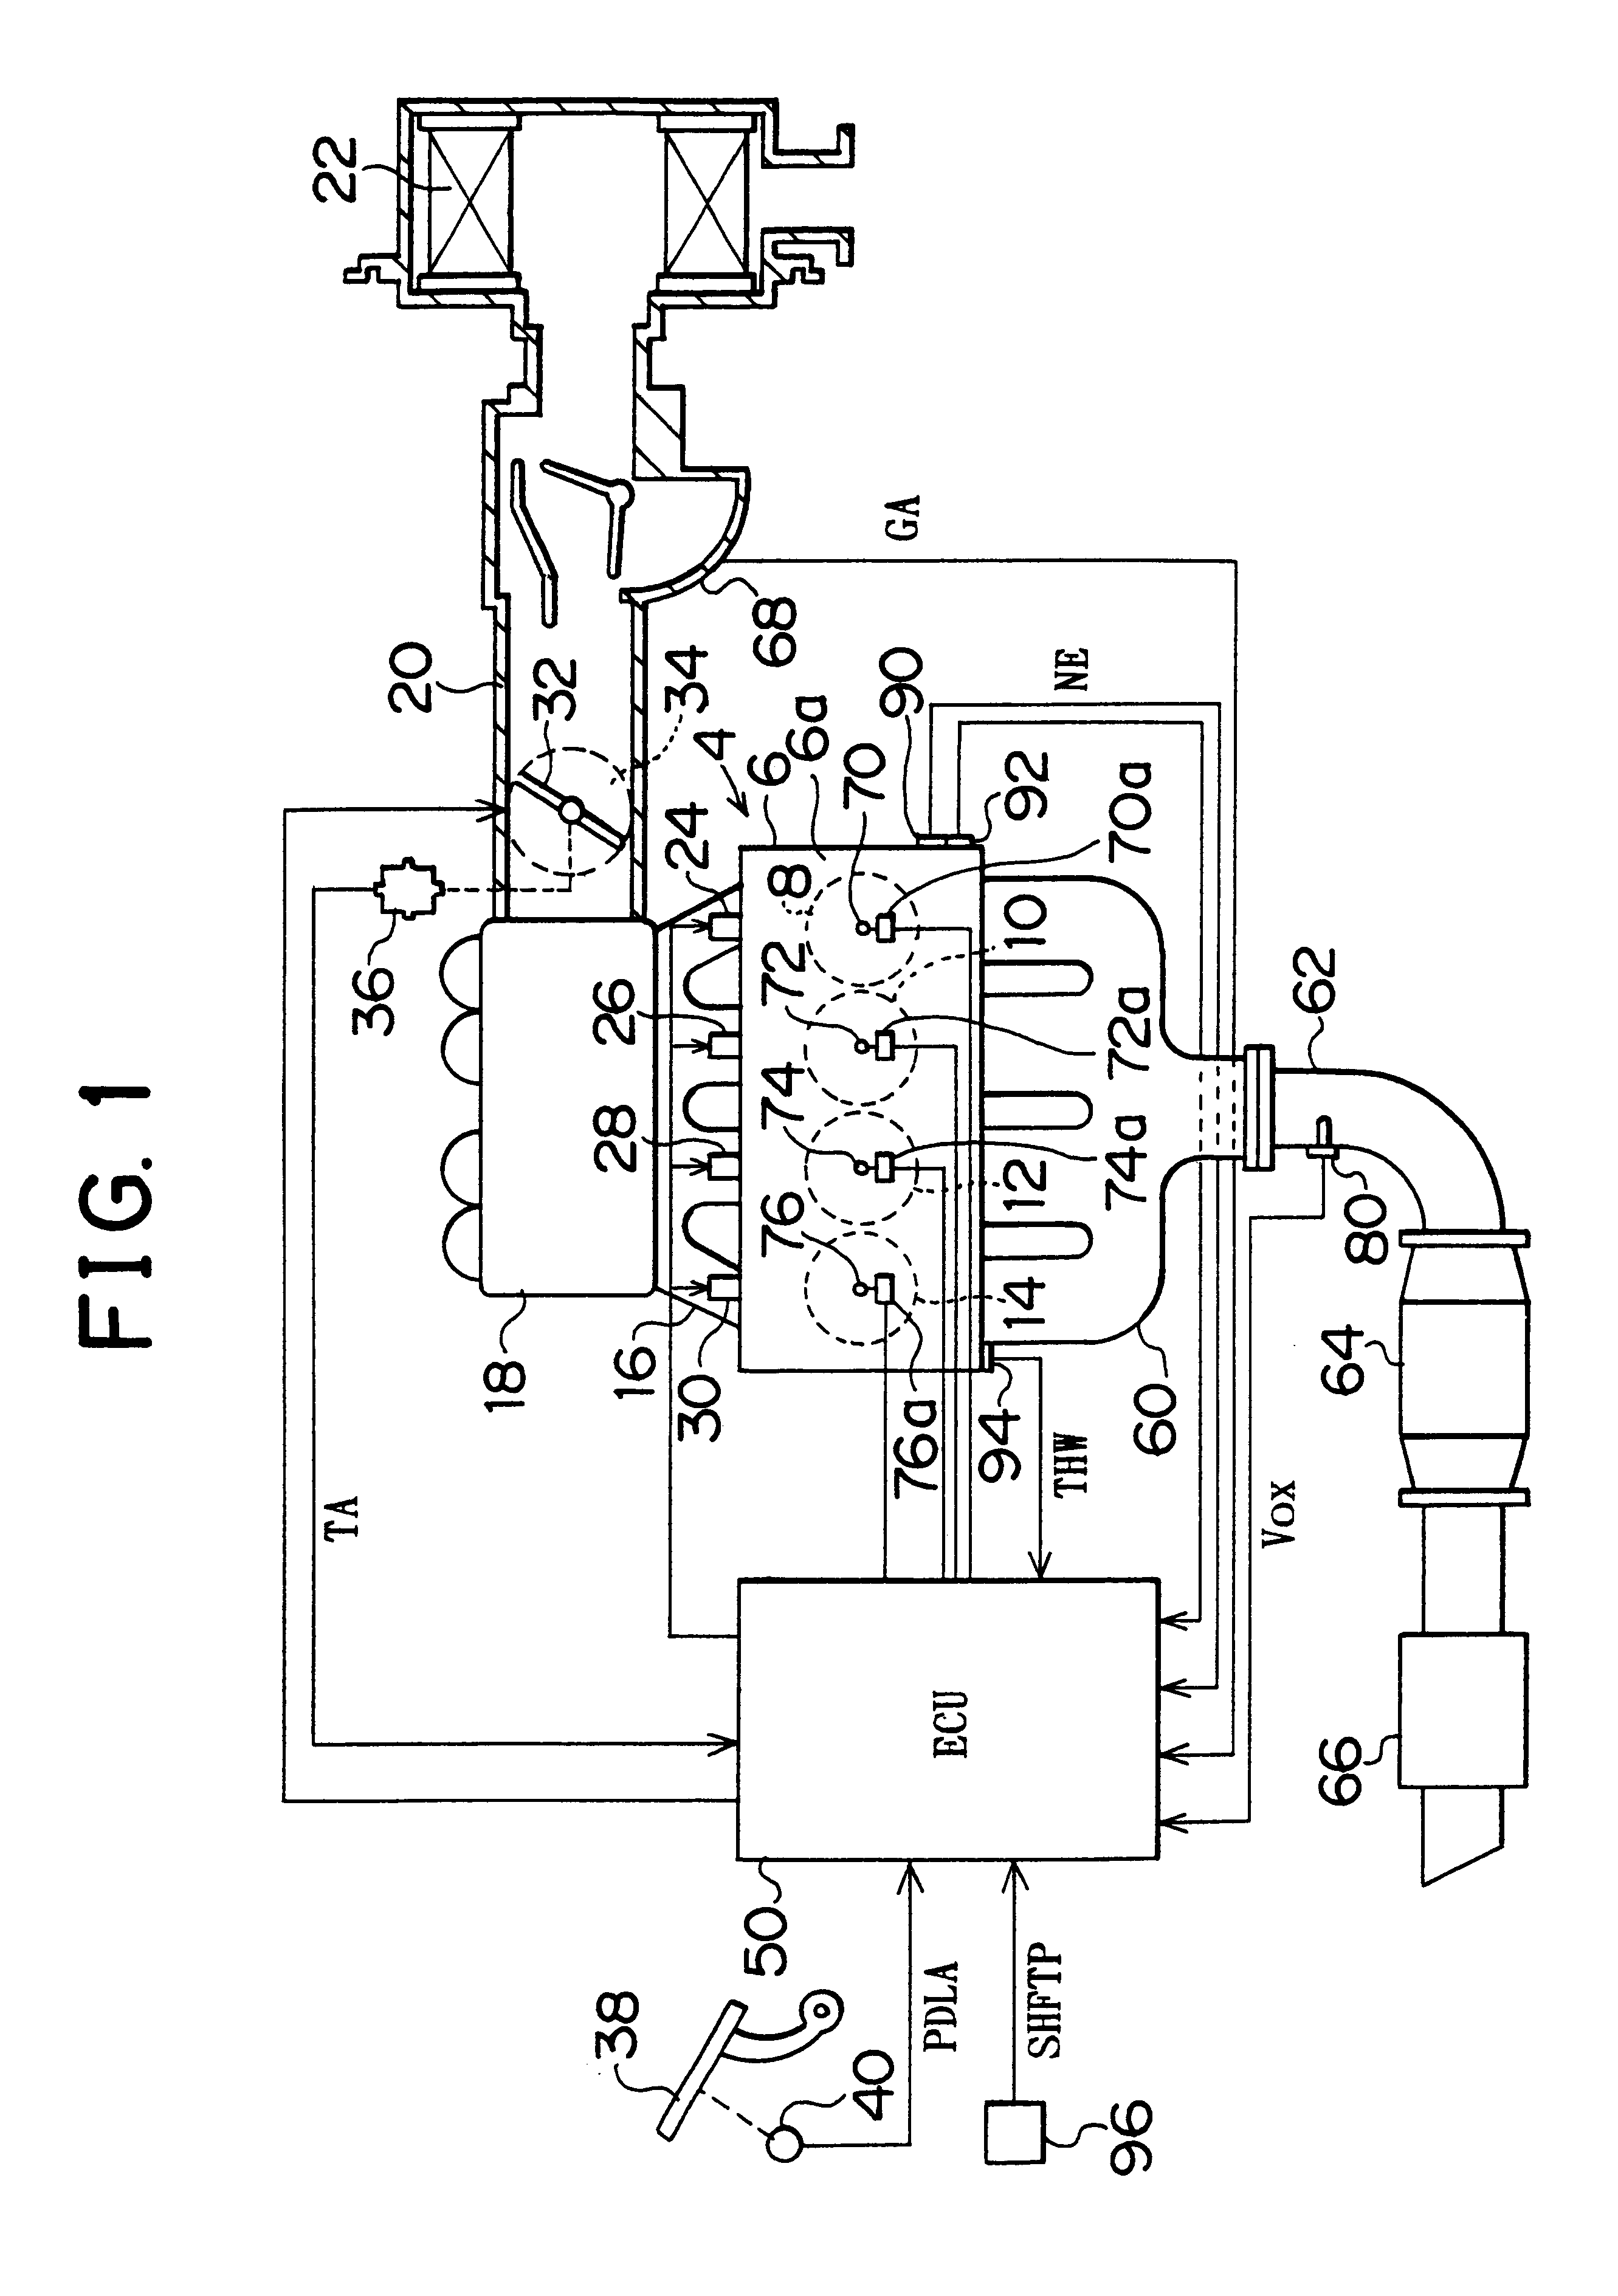 Air-fuel ratio control apparatus and method for internal combustion engine